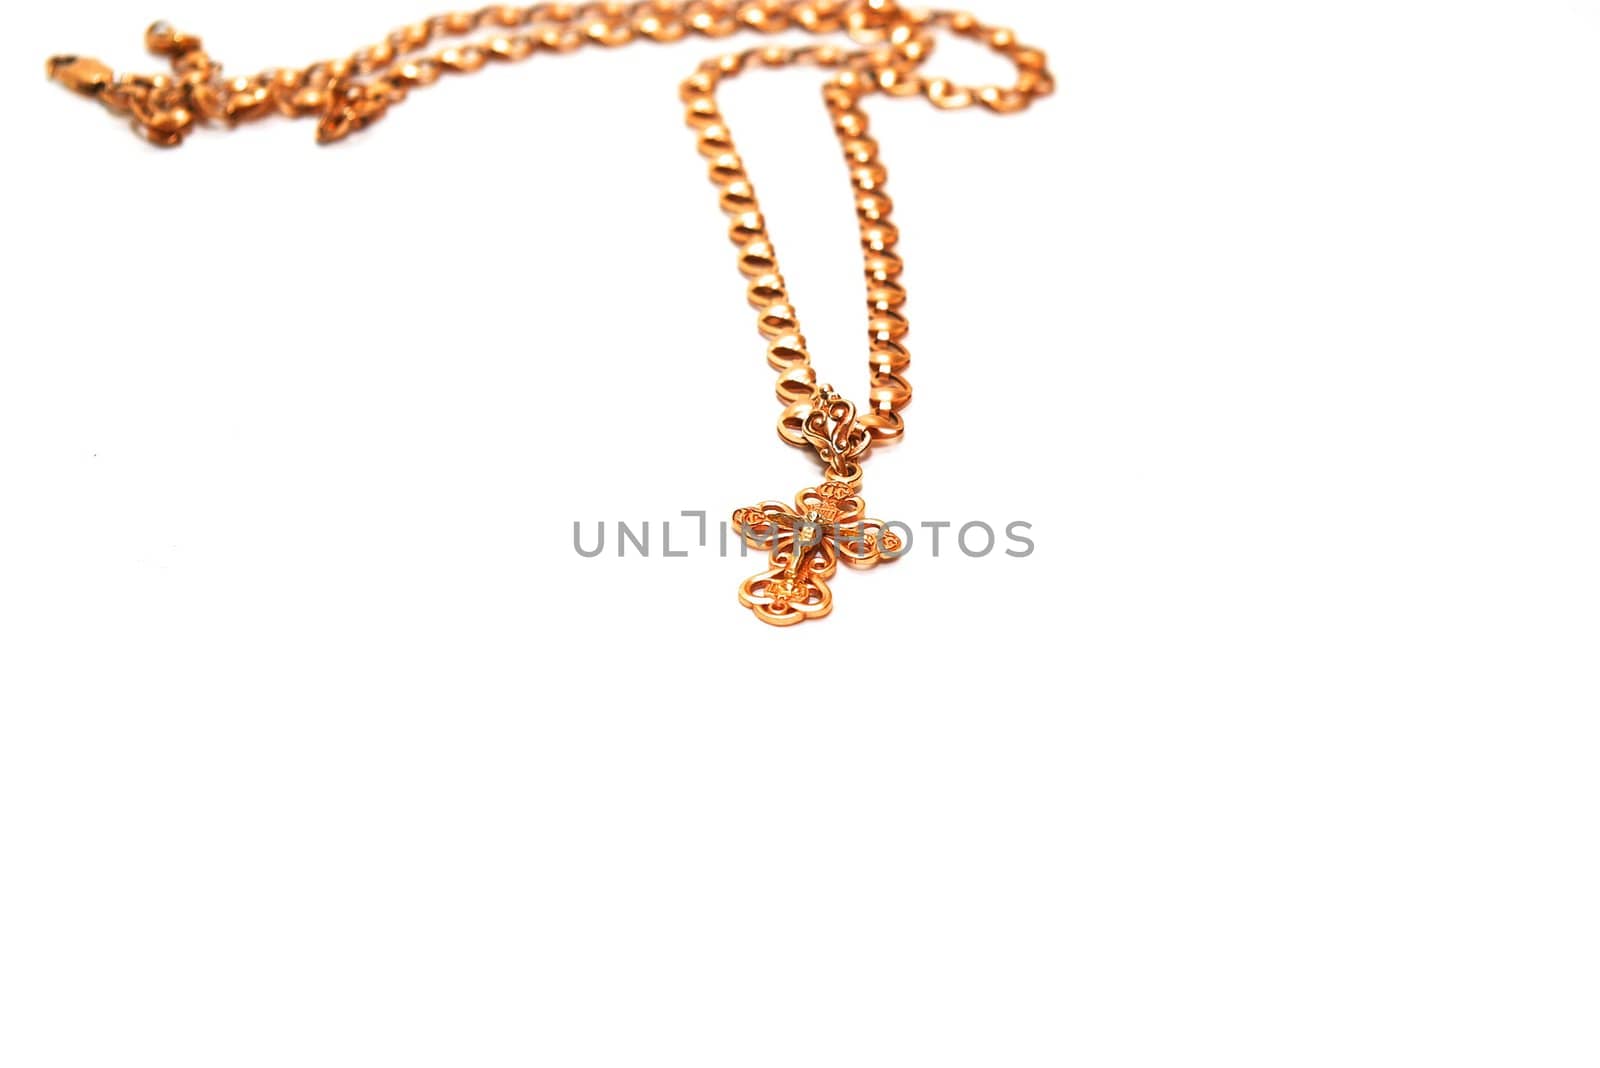 photo of the gold cross on white background